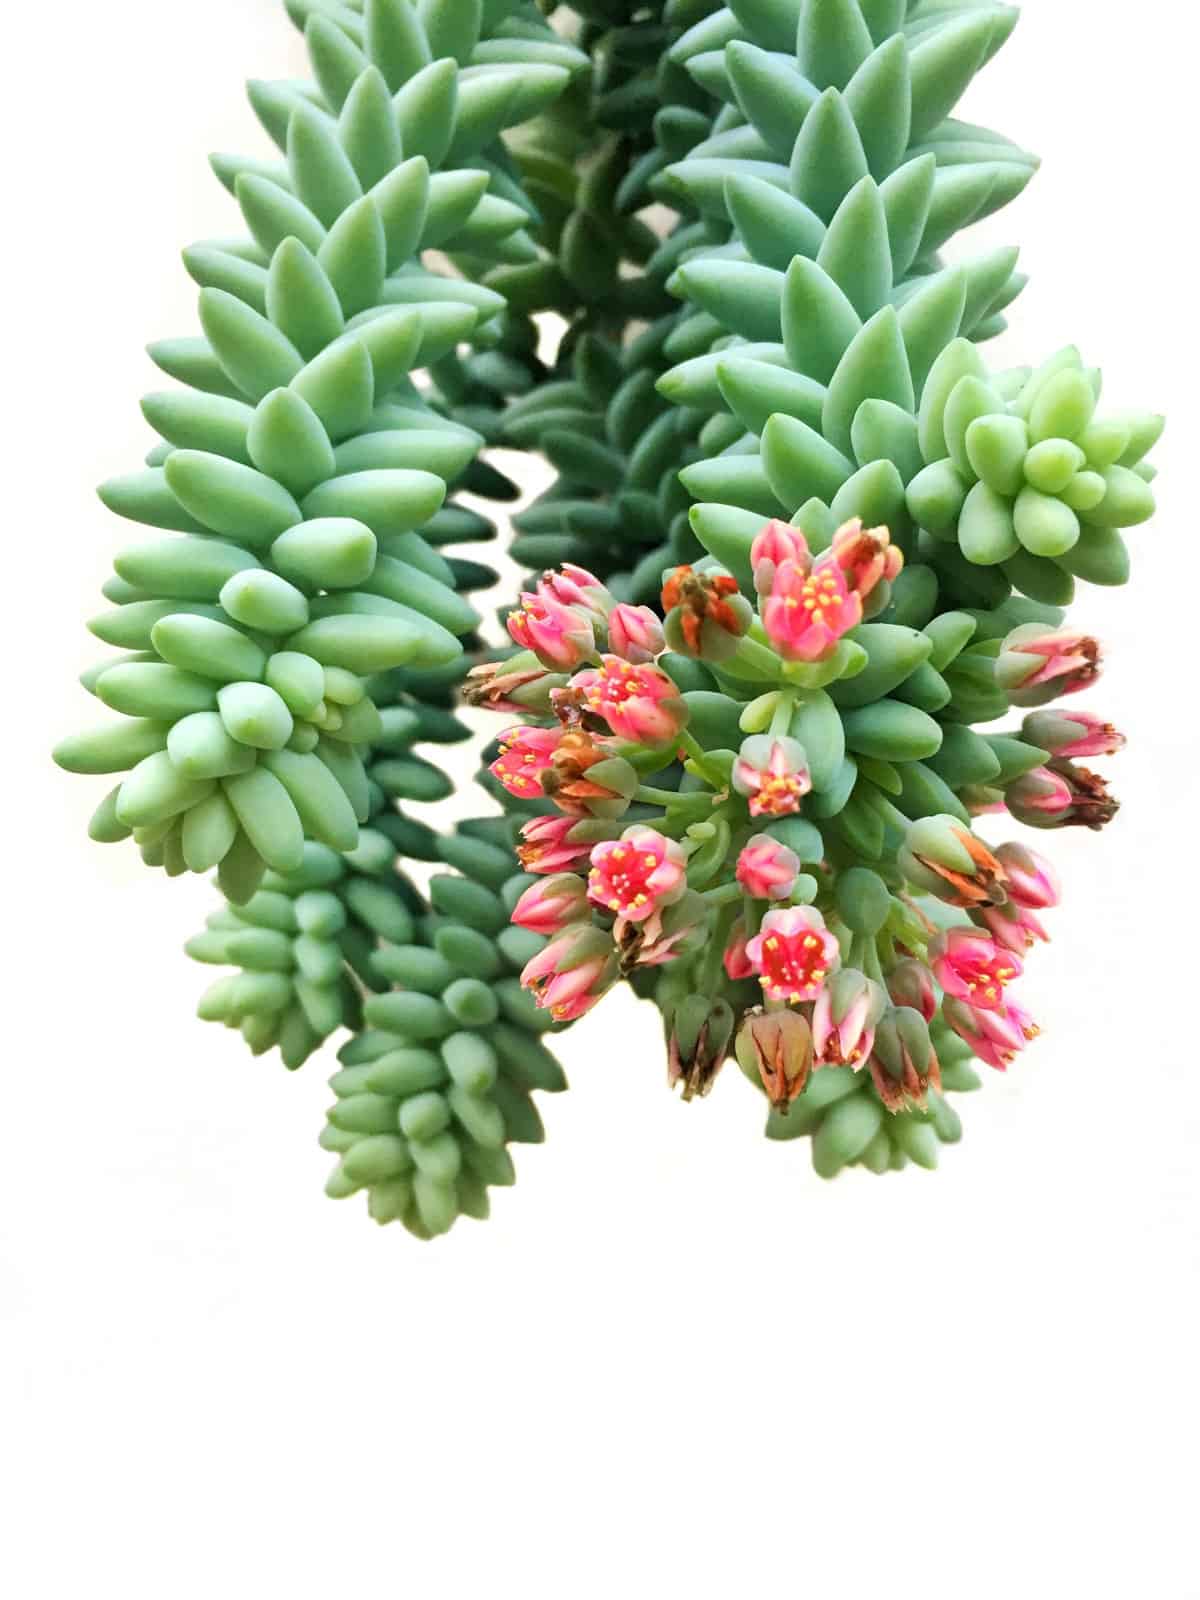 Gorgeous Burros tail with blooming bright pink flowers